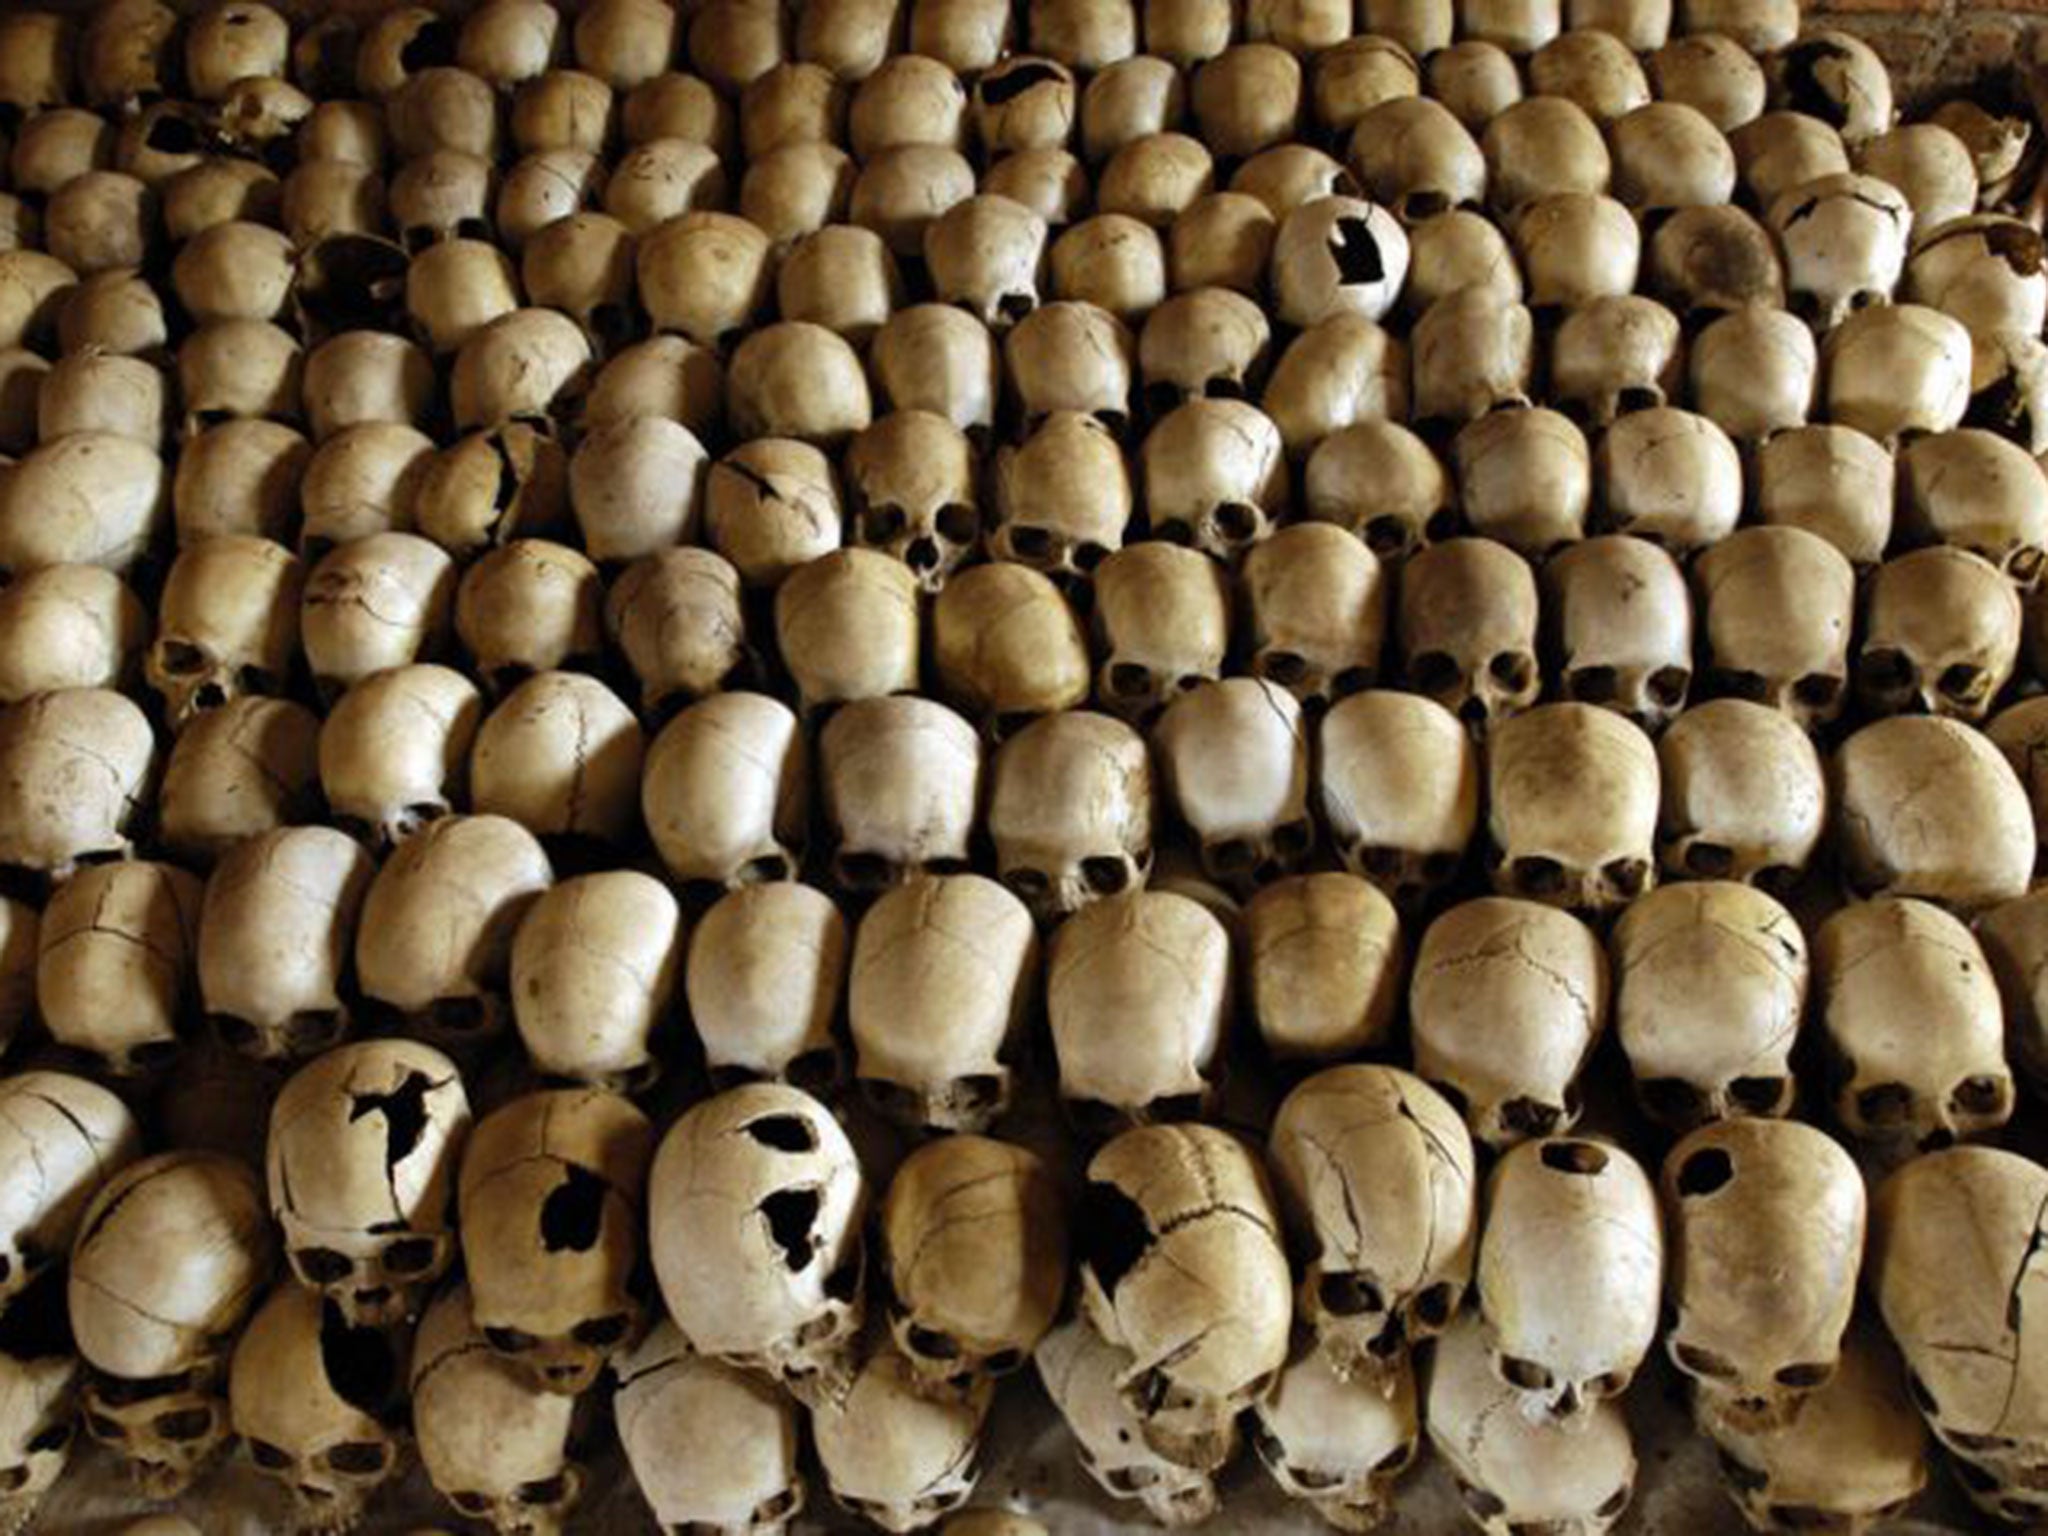 It is estimated that around 800,000 Rwandans died in the genocide